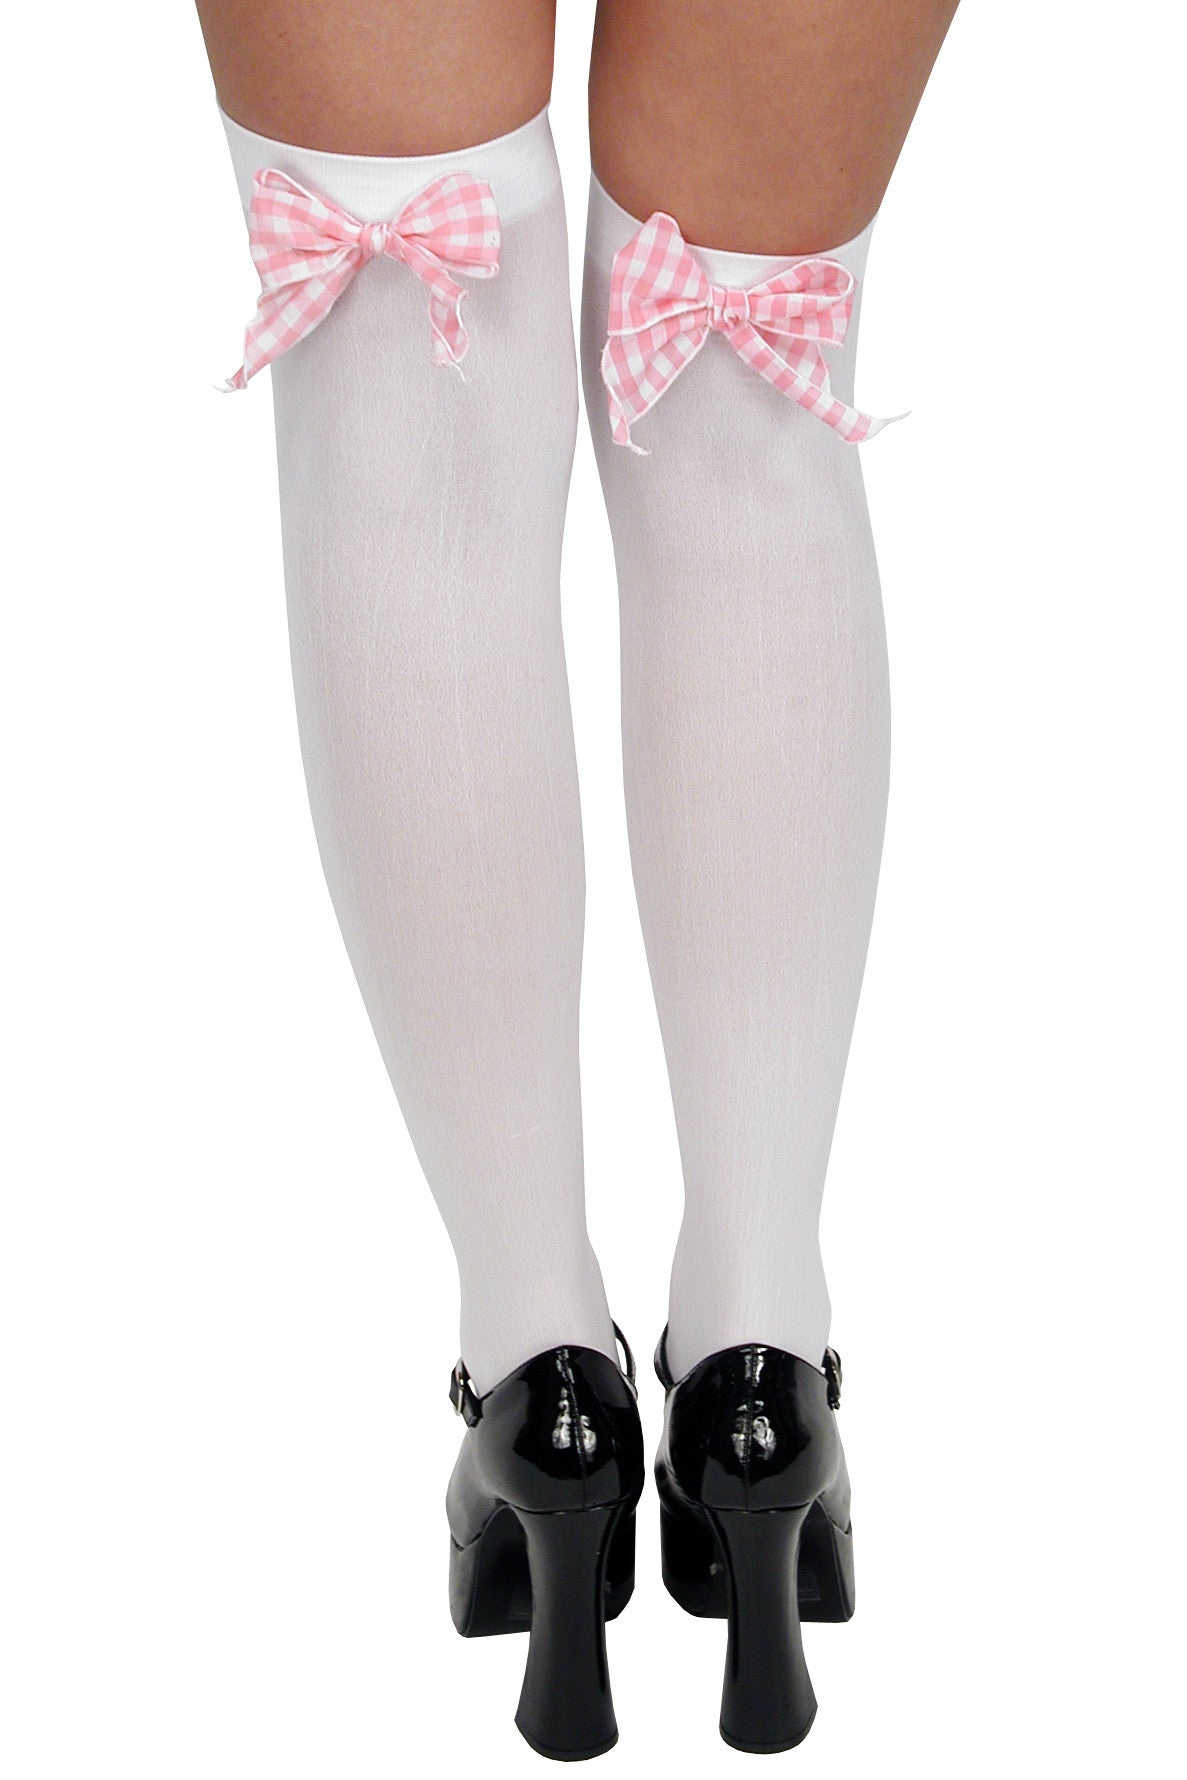 White Stockings with Pink Bows for Women